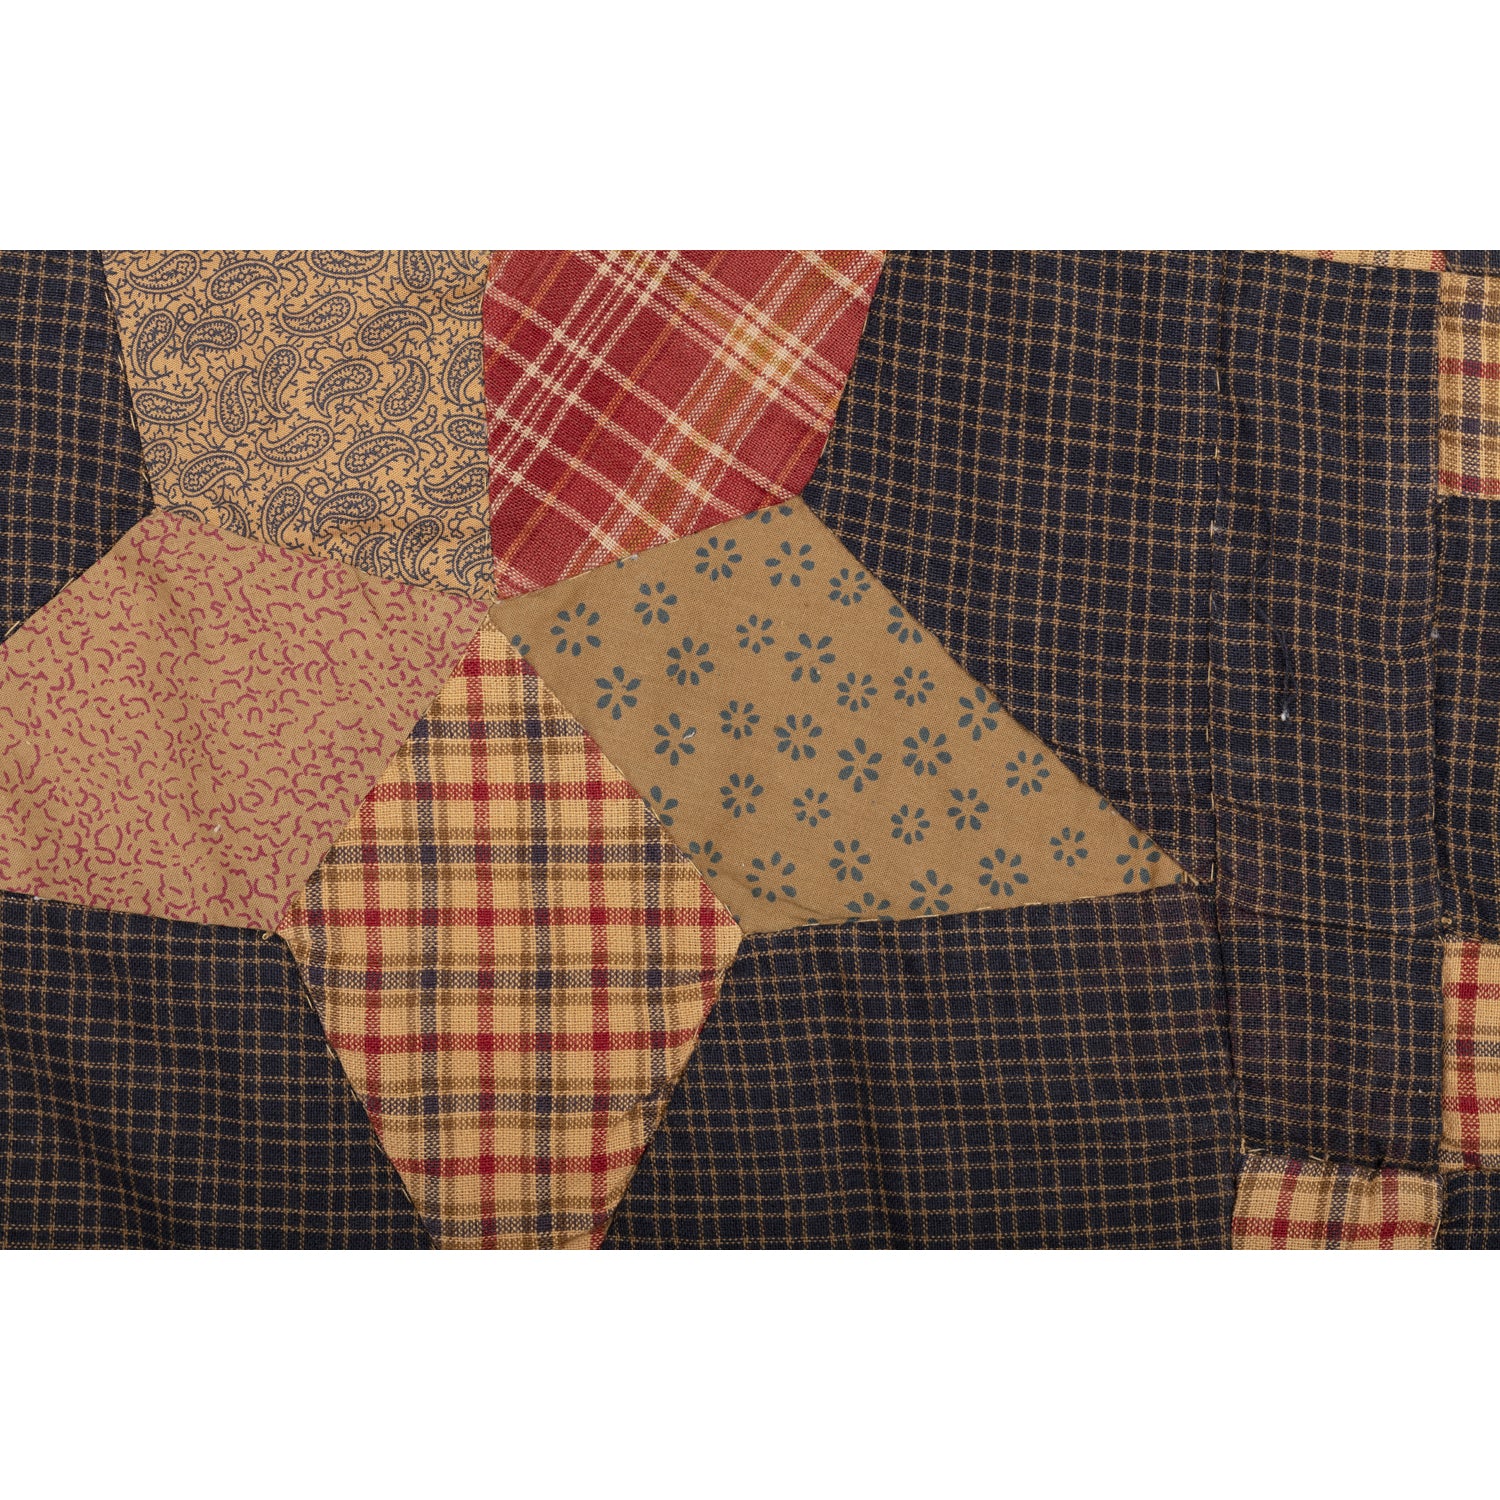 12273-Arlington-Runner-Quilted-Patchwork-Star-13x48-image-6